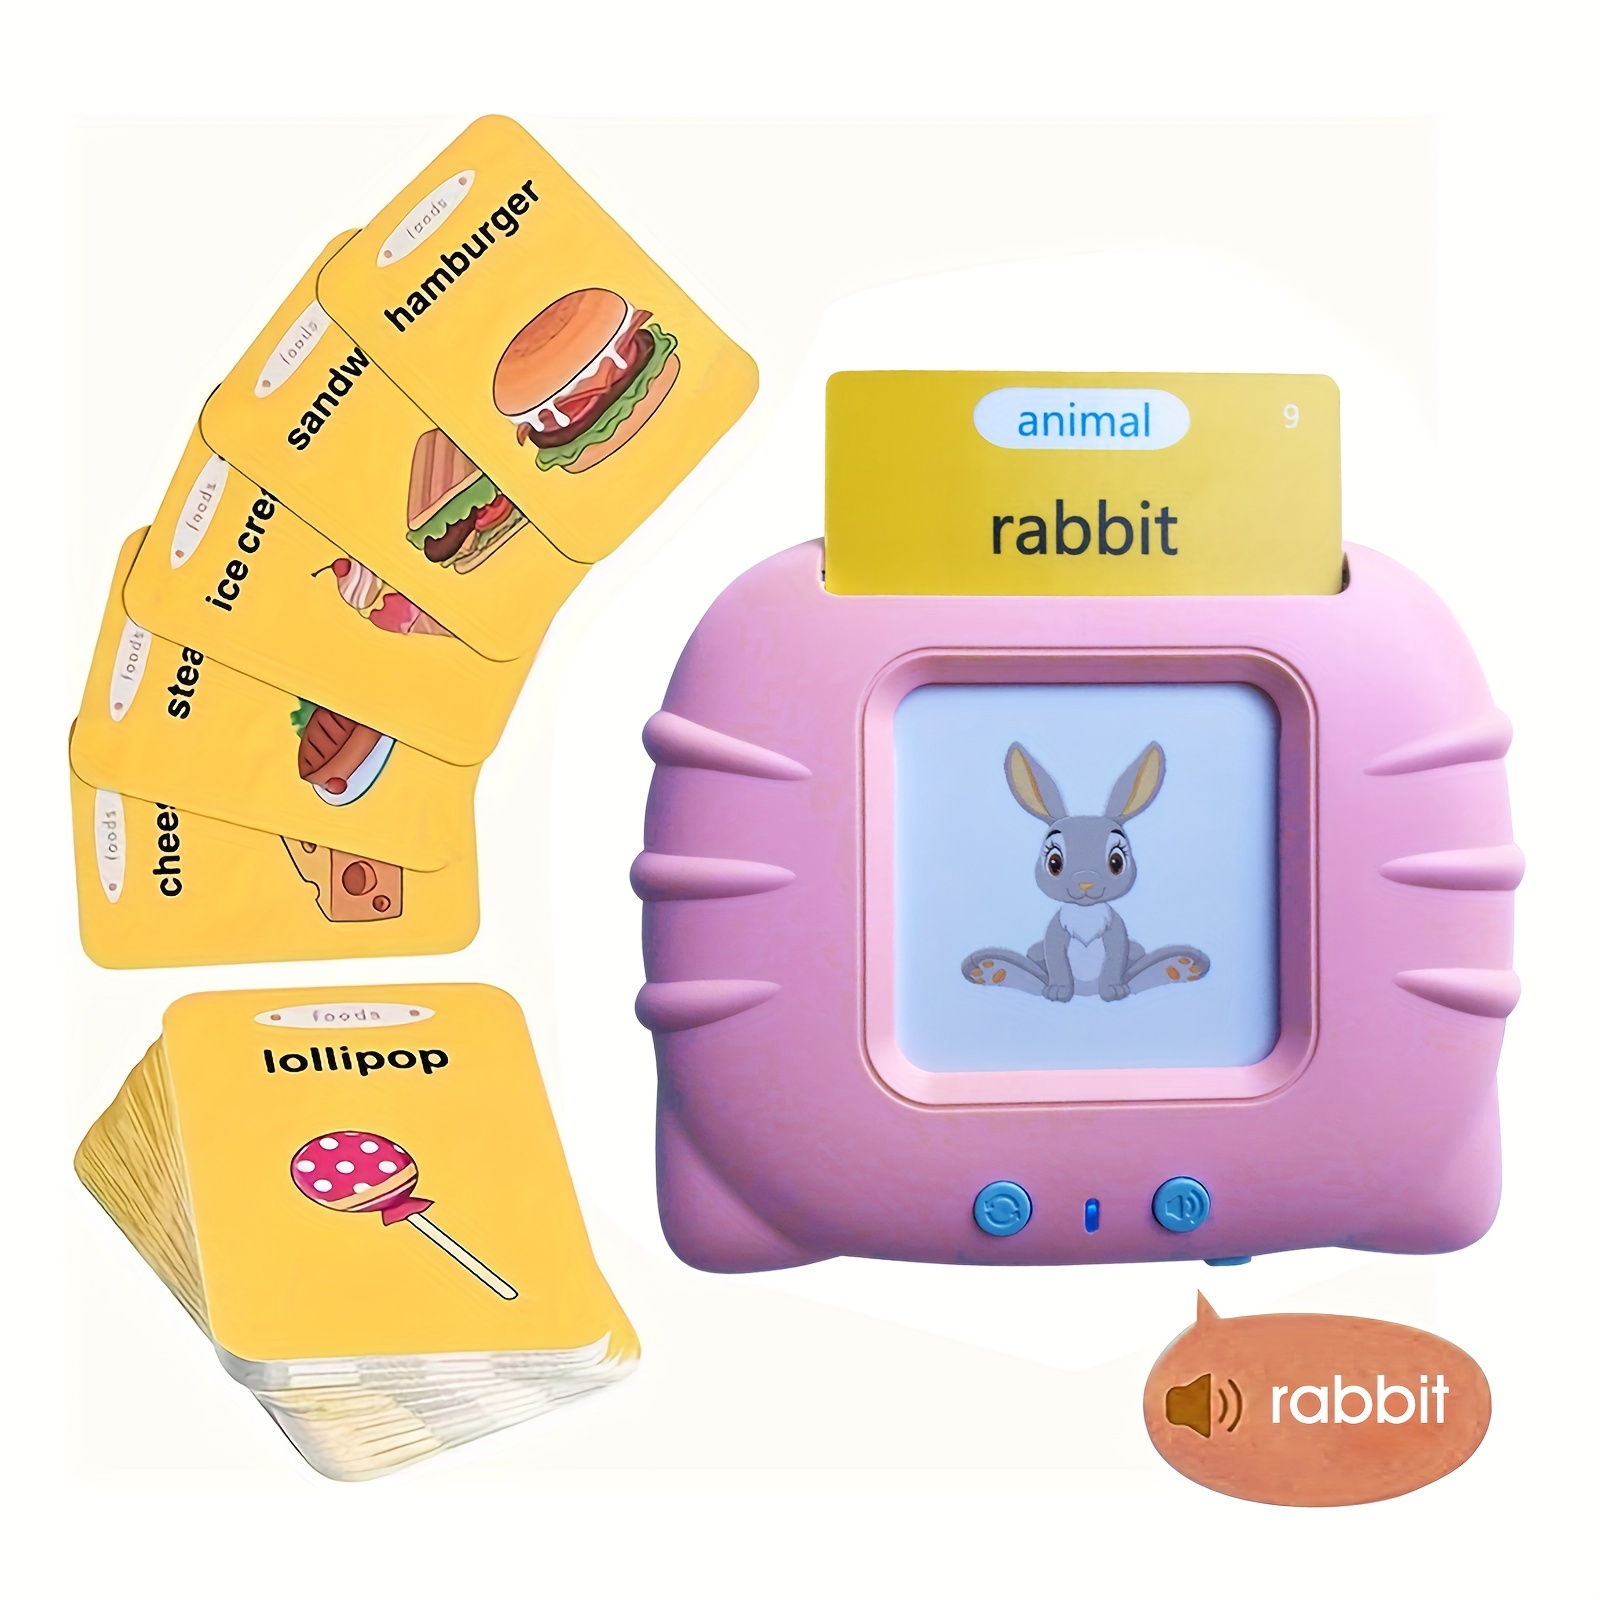 Toddler Toys for 2 3 4 5 Year Old Boys & Girls,Talking Flash Cards